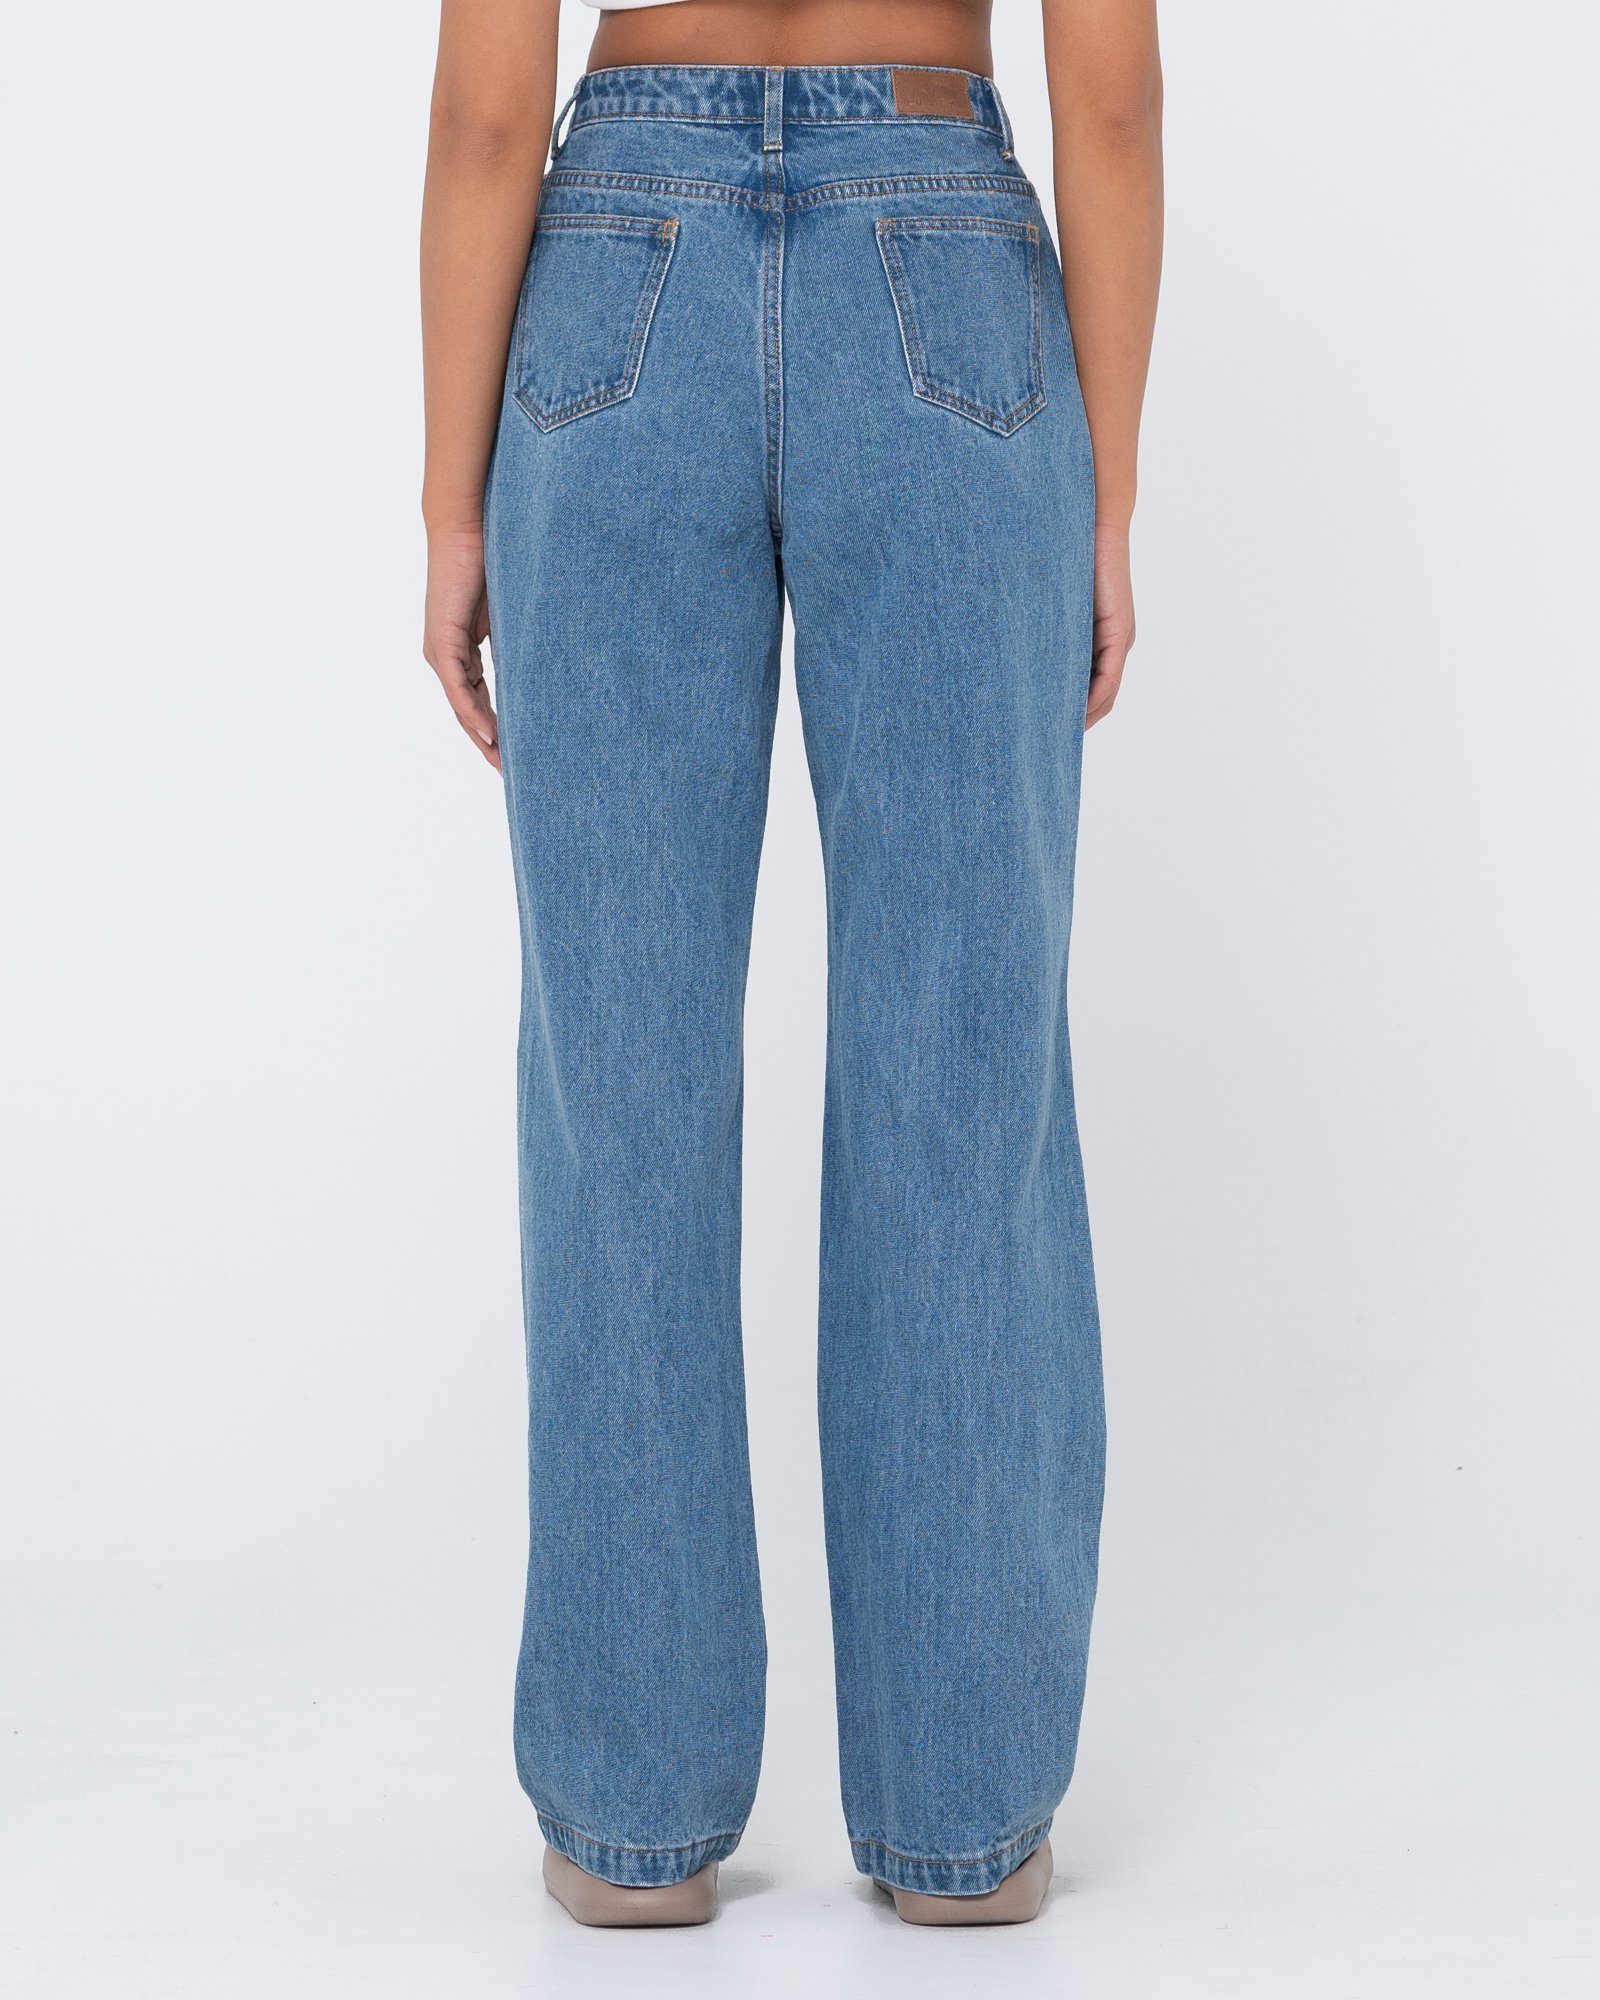 Sea BAGGY HIGH Blue Weite - Rusty JEAN Jeans